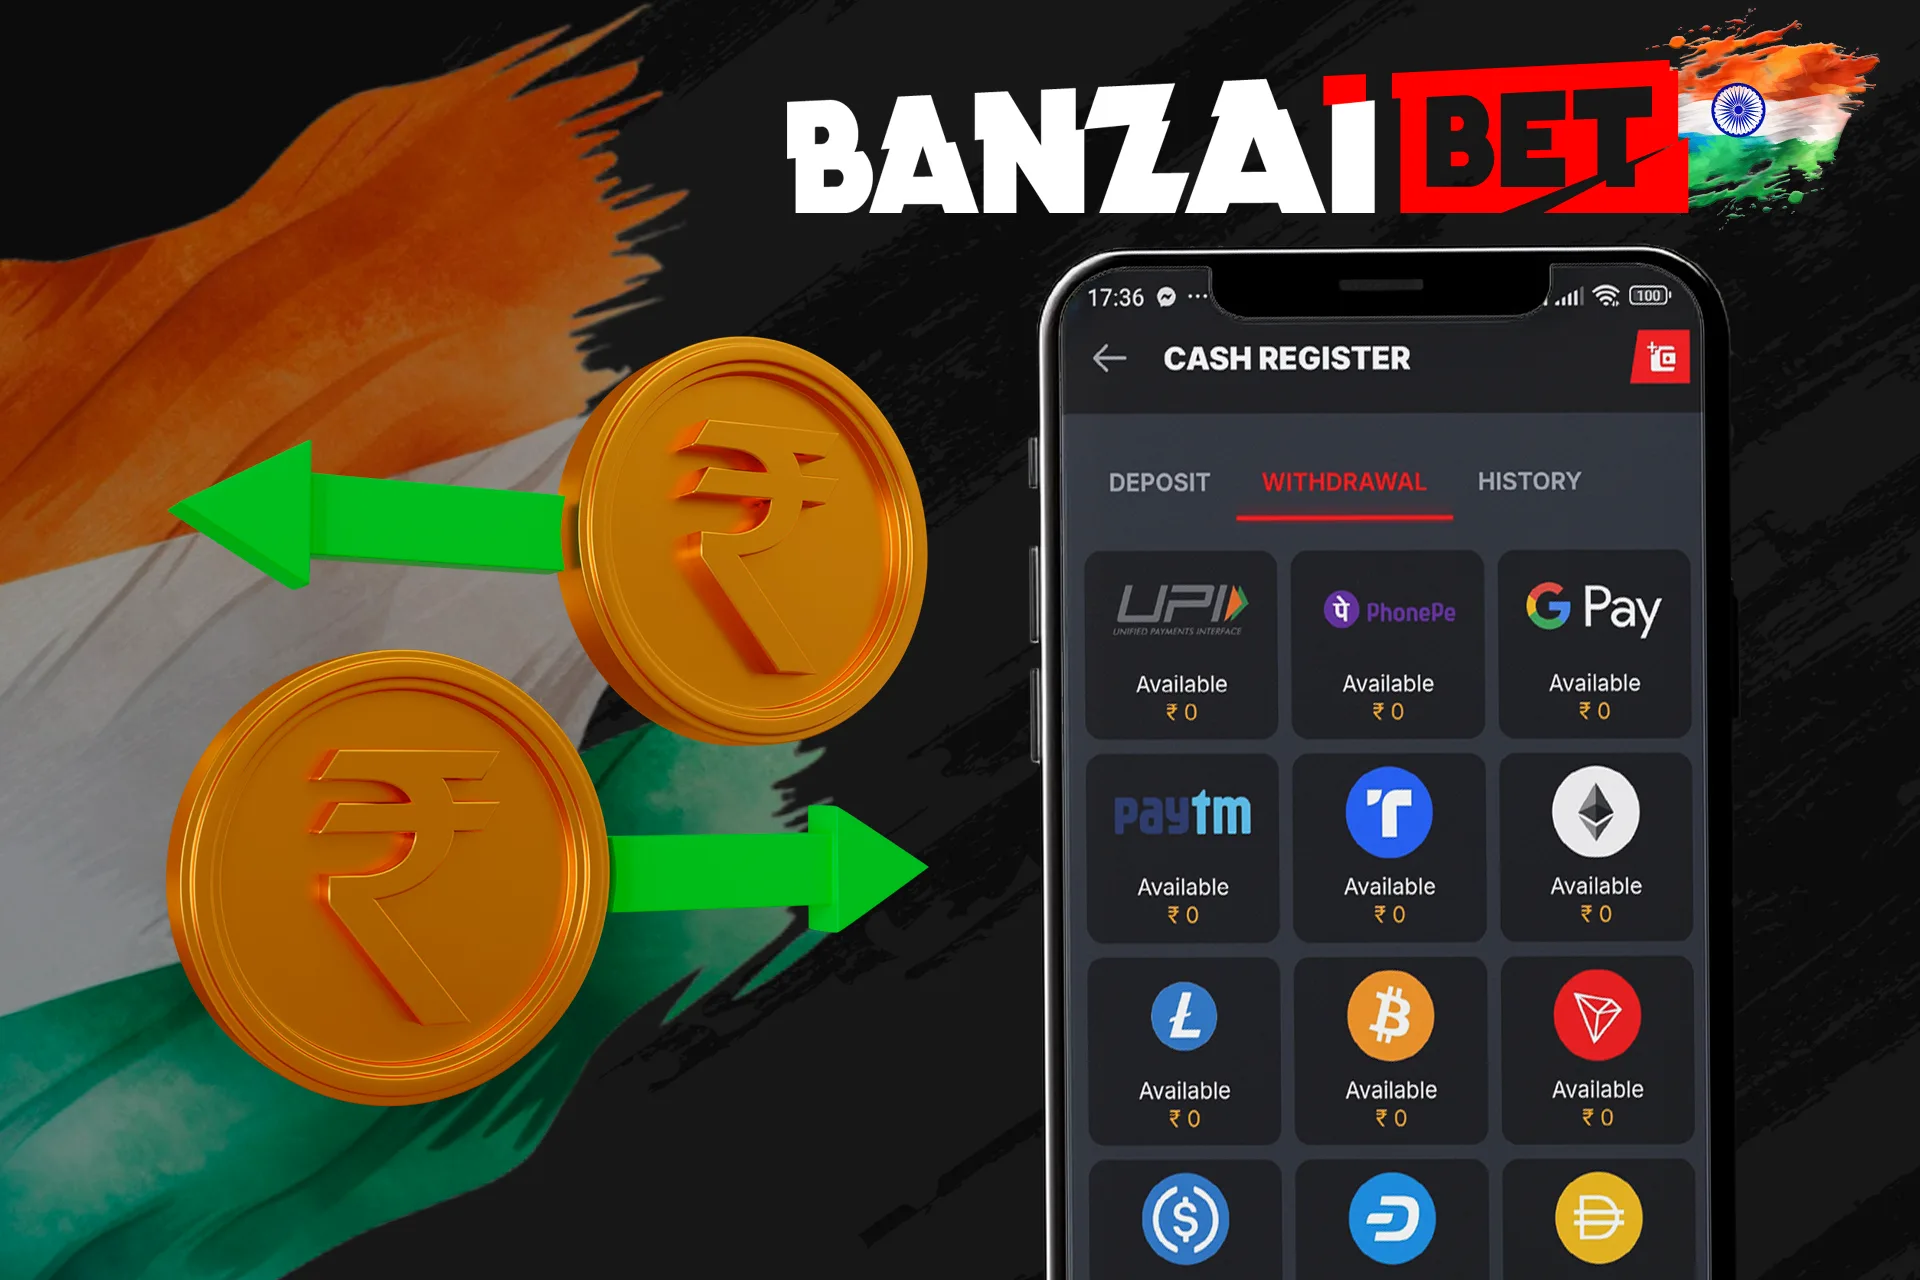 Claim your winnings at Banzaibet India